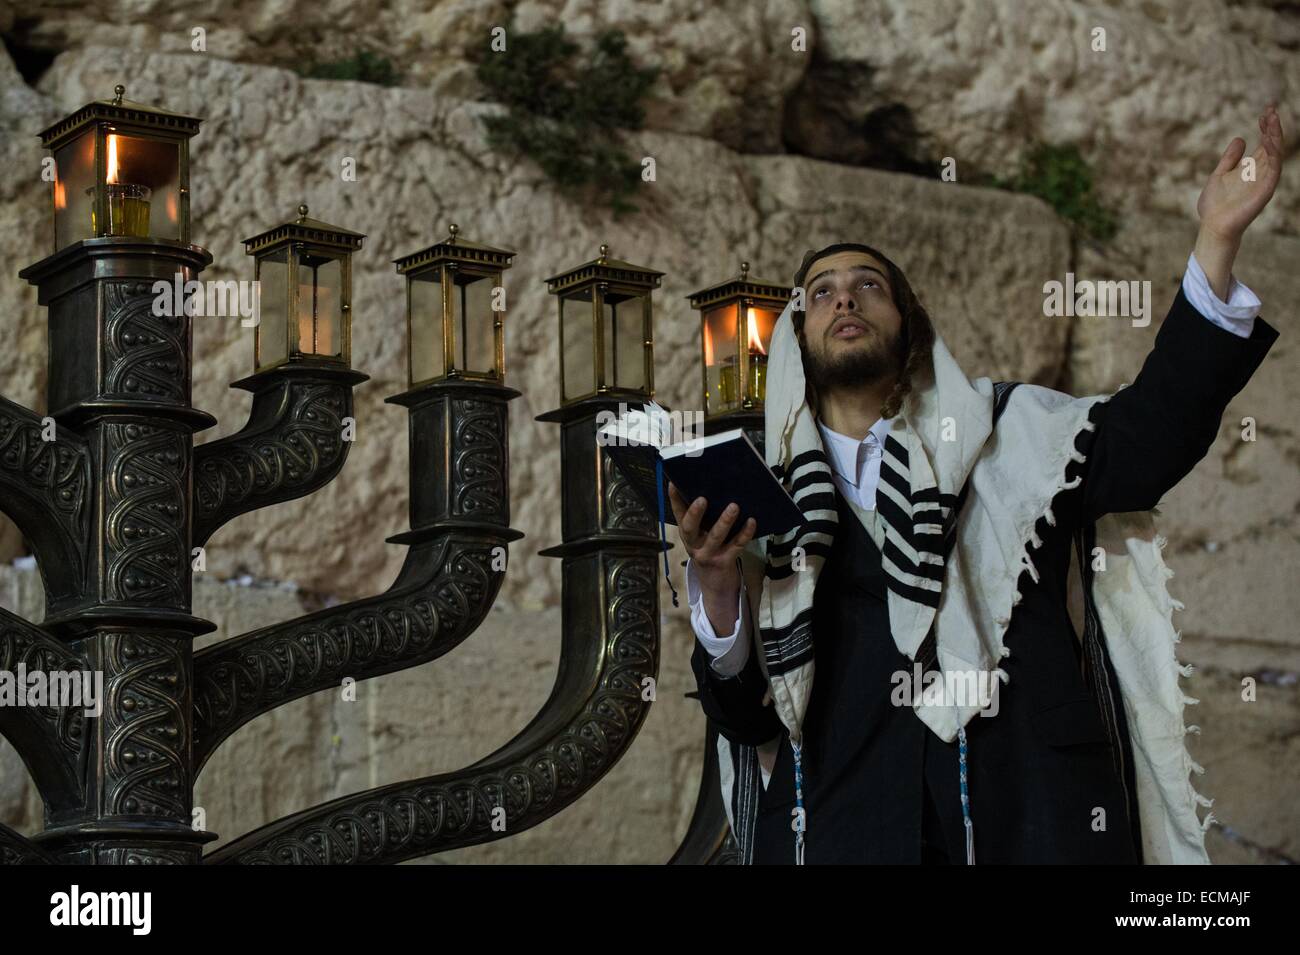 (141217) -- JERUSALEM, Dec. 17, 2014 (Xinhua) -- An Ultra-Orthodox Jewish man prays to mark Hanukkah in front of a large-sized Hannukiya at the Western Wall in the Old City of Jerusalem, on Dec. 16, 2014. Hanukkah, also known as the Festival of Lights and Feast of Dedication, is an eight-day Jewish holiday commemorating the rededication of the Holy Temple (the Second Temple) in Jerusalem at the time of the Maccabean Revolt against the Seleucid Empire of the 2nd Century B.C. Hanukkah is observed for eight nights and days, starting on the 25th day of Kislev according to the Hebrew calendar, whic Stock Photo